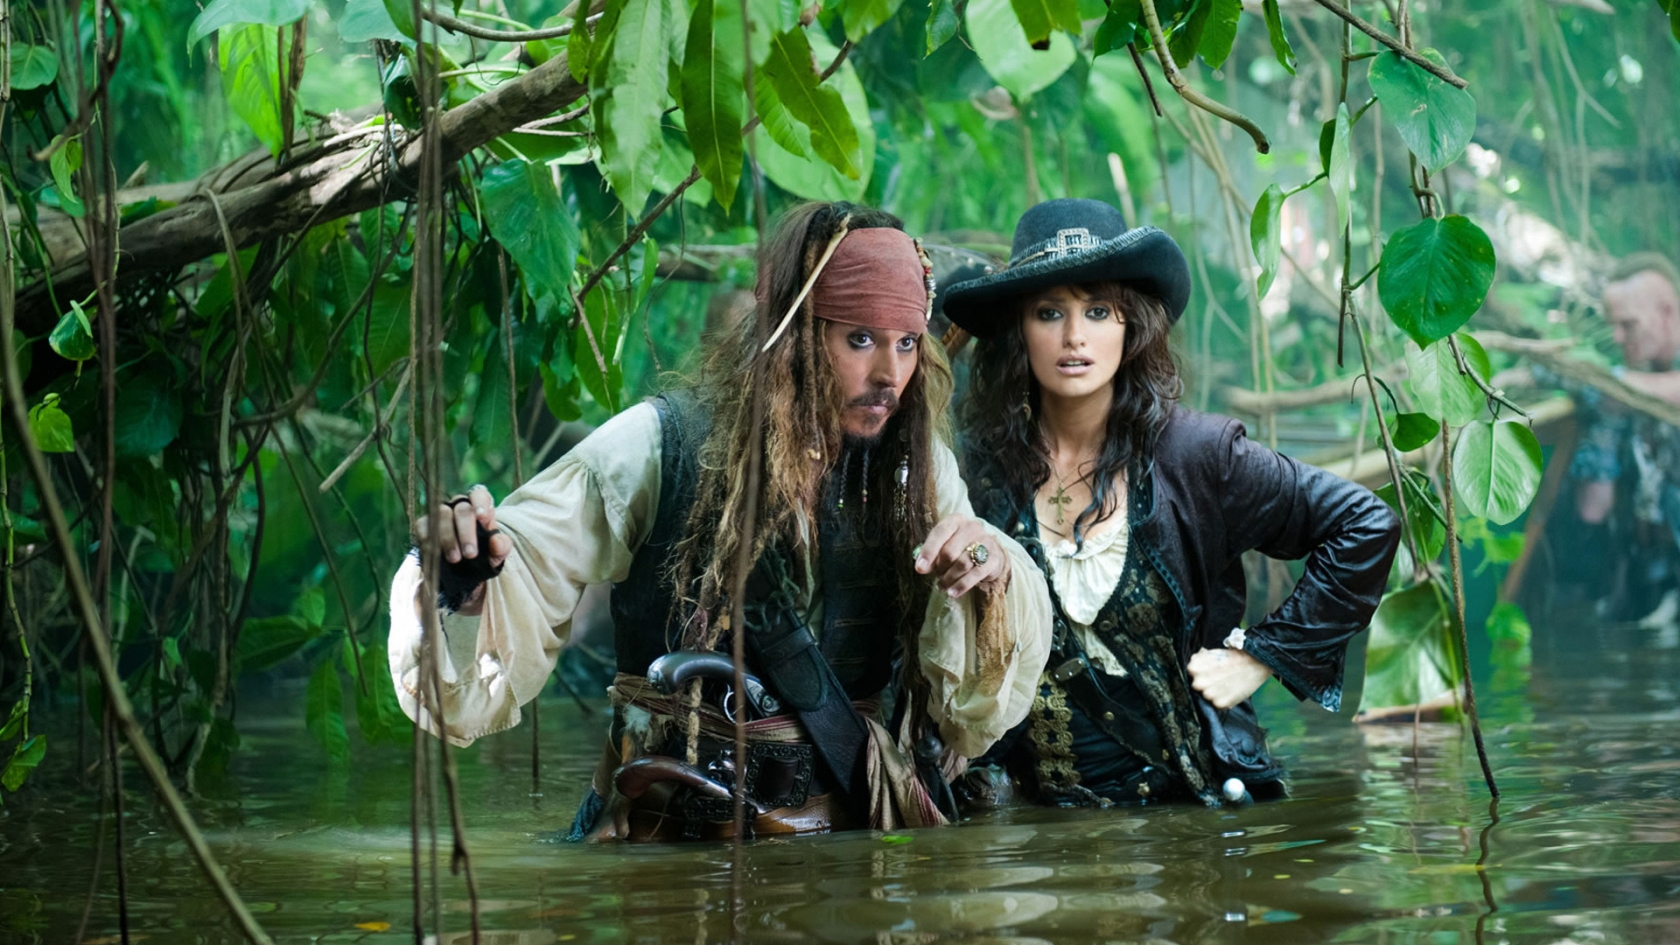 Jack Sparrow and Angelica for 1680 x 945 HDTV resolution